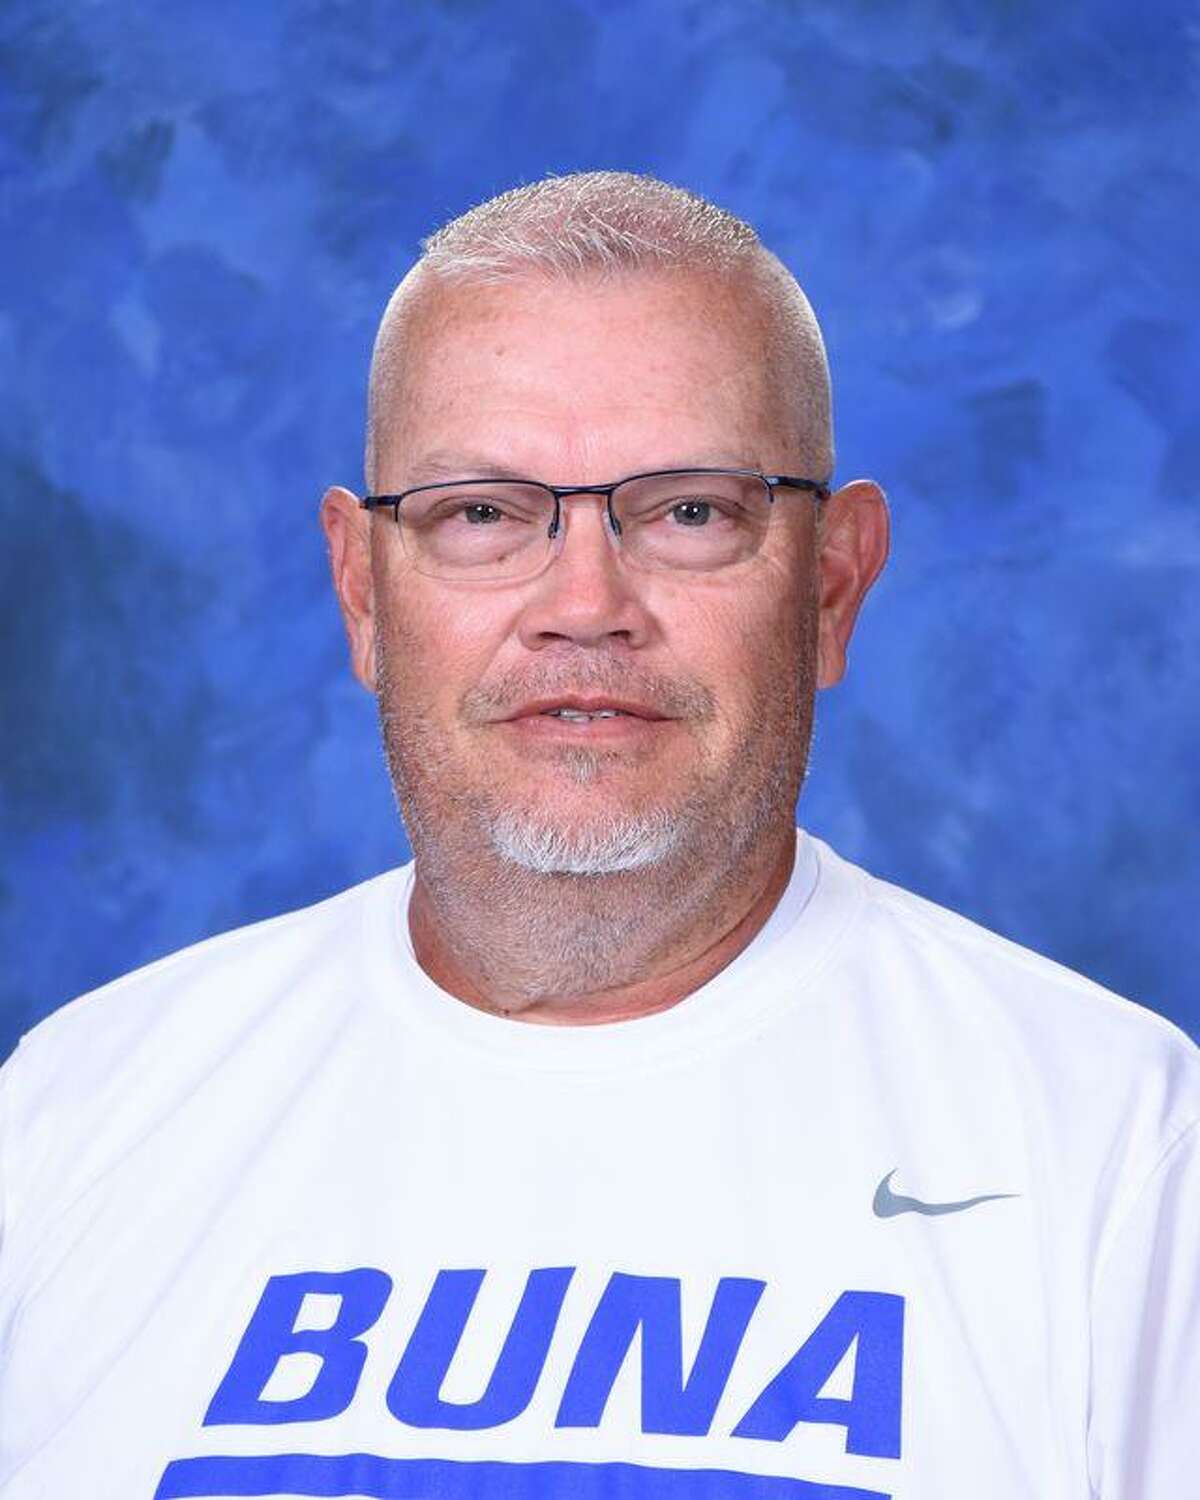 Kevin Terrier has been at Buna for 33 years. He'll now take over as head football coach after a mid-season change.